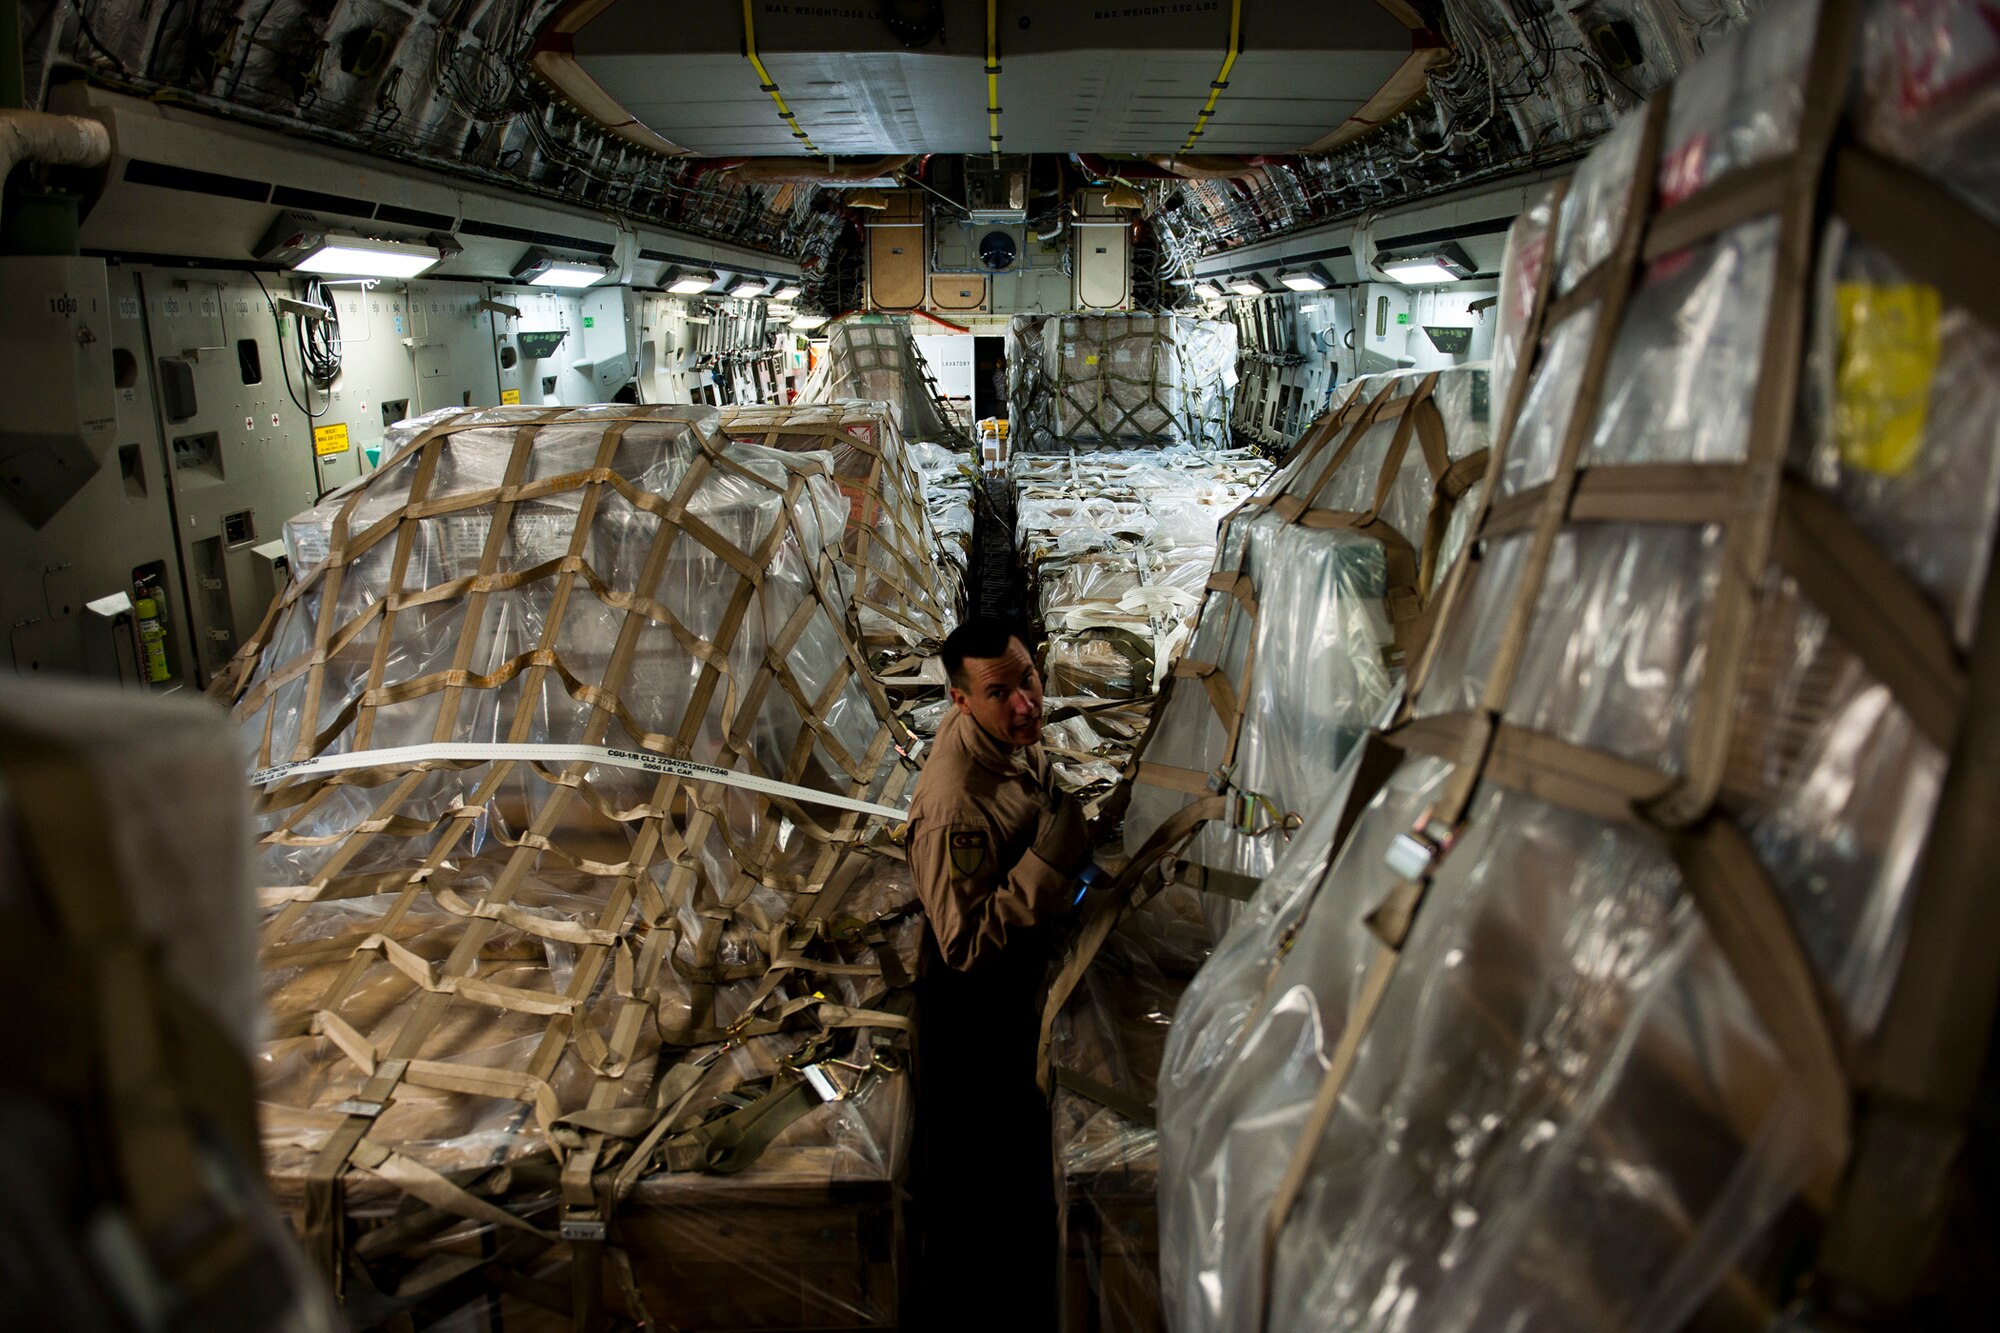 Staff Sgt. Sean Sullivan, an 817th Expeditionary Airlift Squadron loadmaster, inspects cargo onboard a C-17 Globemaster III aircraft Aug. 18, 2011, at Incirlik Air Base, Turkey, prior to a mission to transport equipment and supplies to Kandahar Air Field, Afghanistan. Loadmasters ensure the cargo is properly secured to prevent movement during flight. (U.S. Air Force photo by Tech. Sgt. Michael B. Keller/Released)